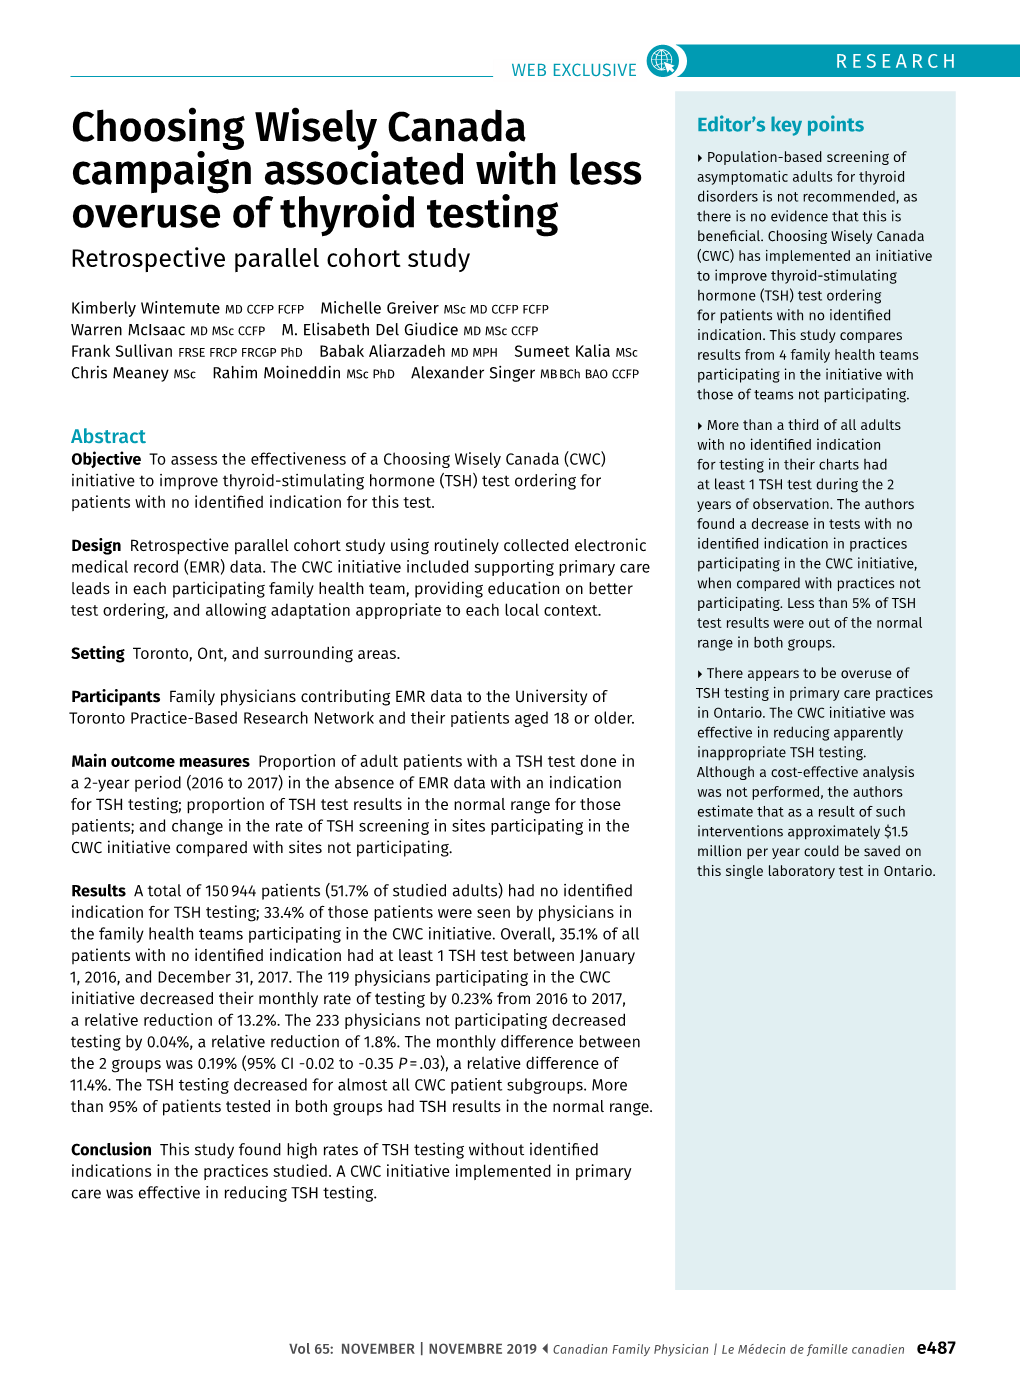 Choosing Wisely Canada Campaign Associated with Less Overuse of Thyroid Testing RESEARCH